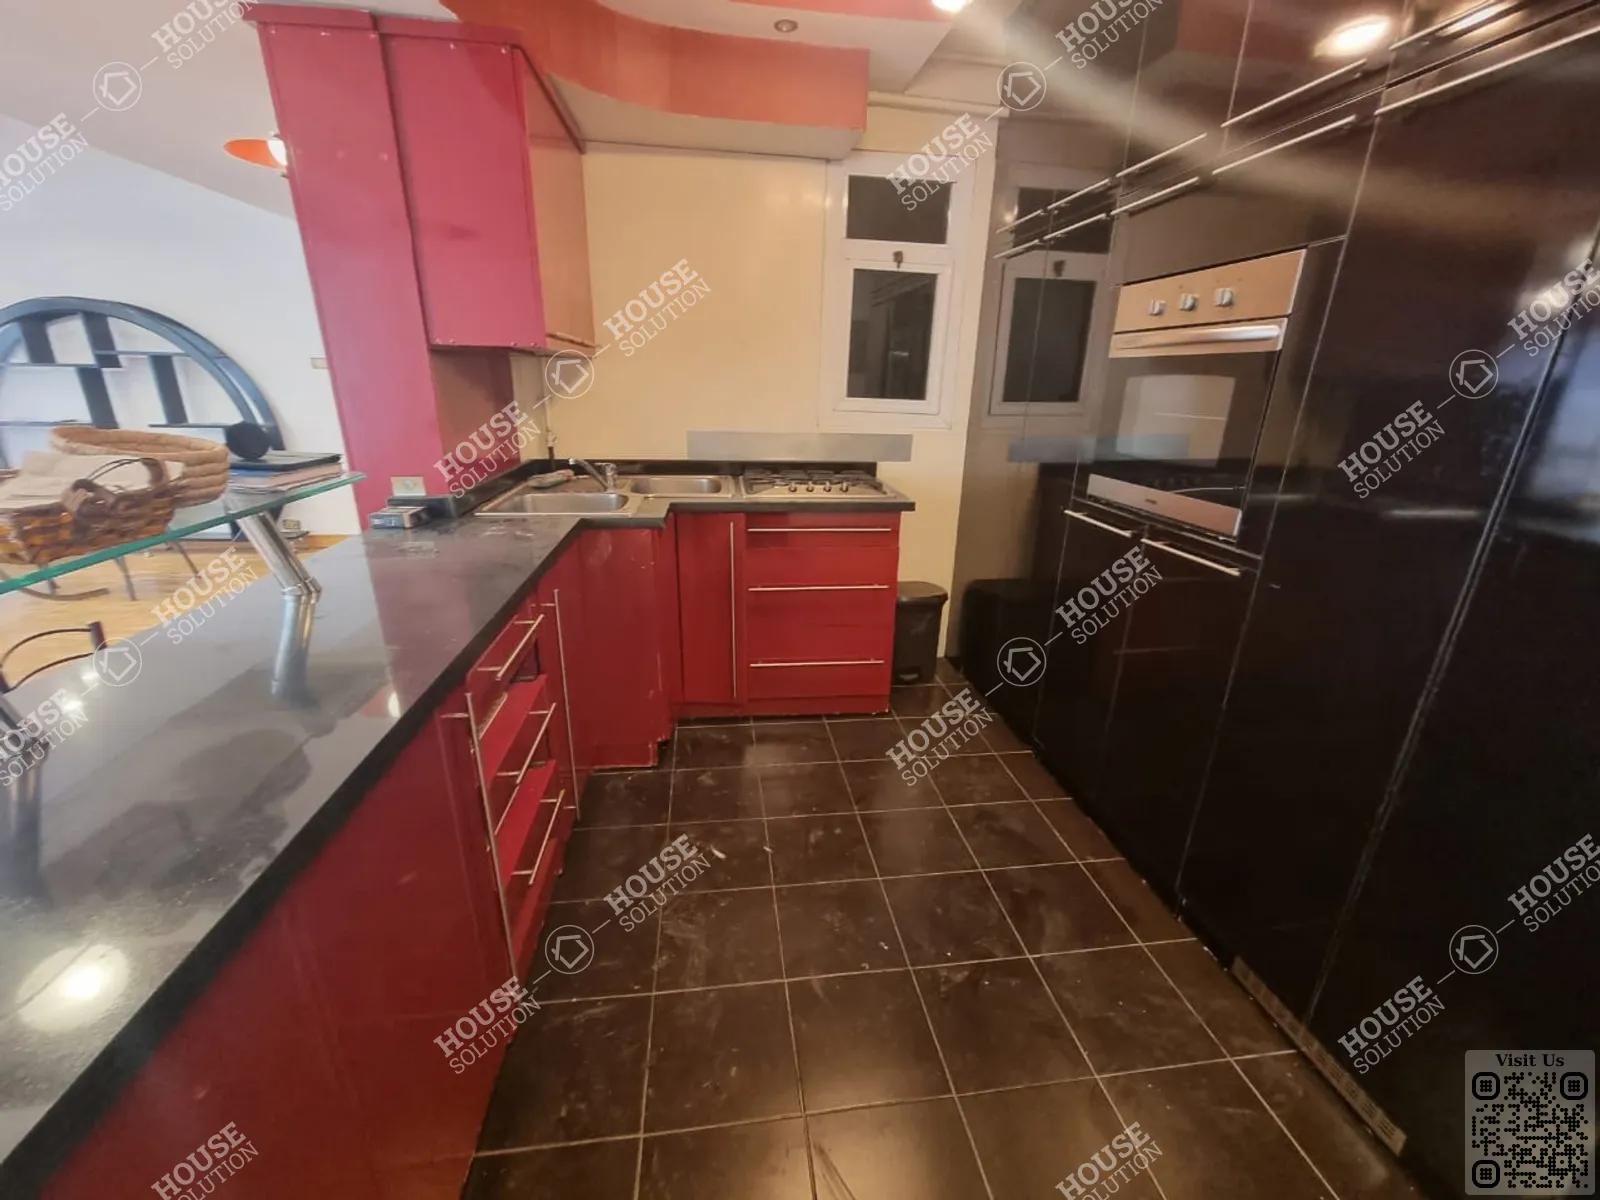 KITCHEN  @ Apartments For Rent In Maadi Maadi Sarayat Area: 175 m² consists of 2 Bedrooms 2 Bathrooms Modern furnished 5 stars #2612-1